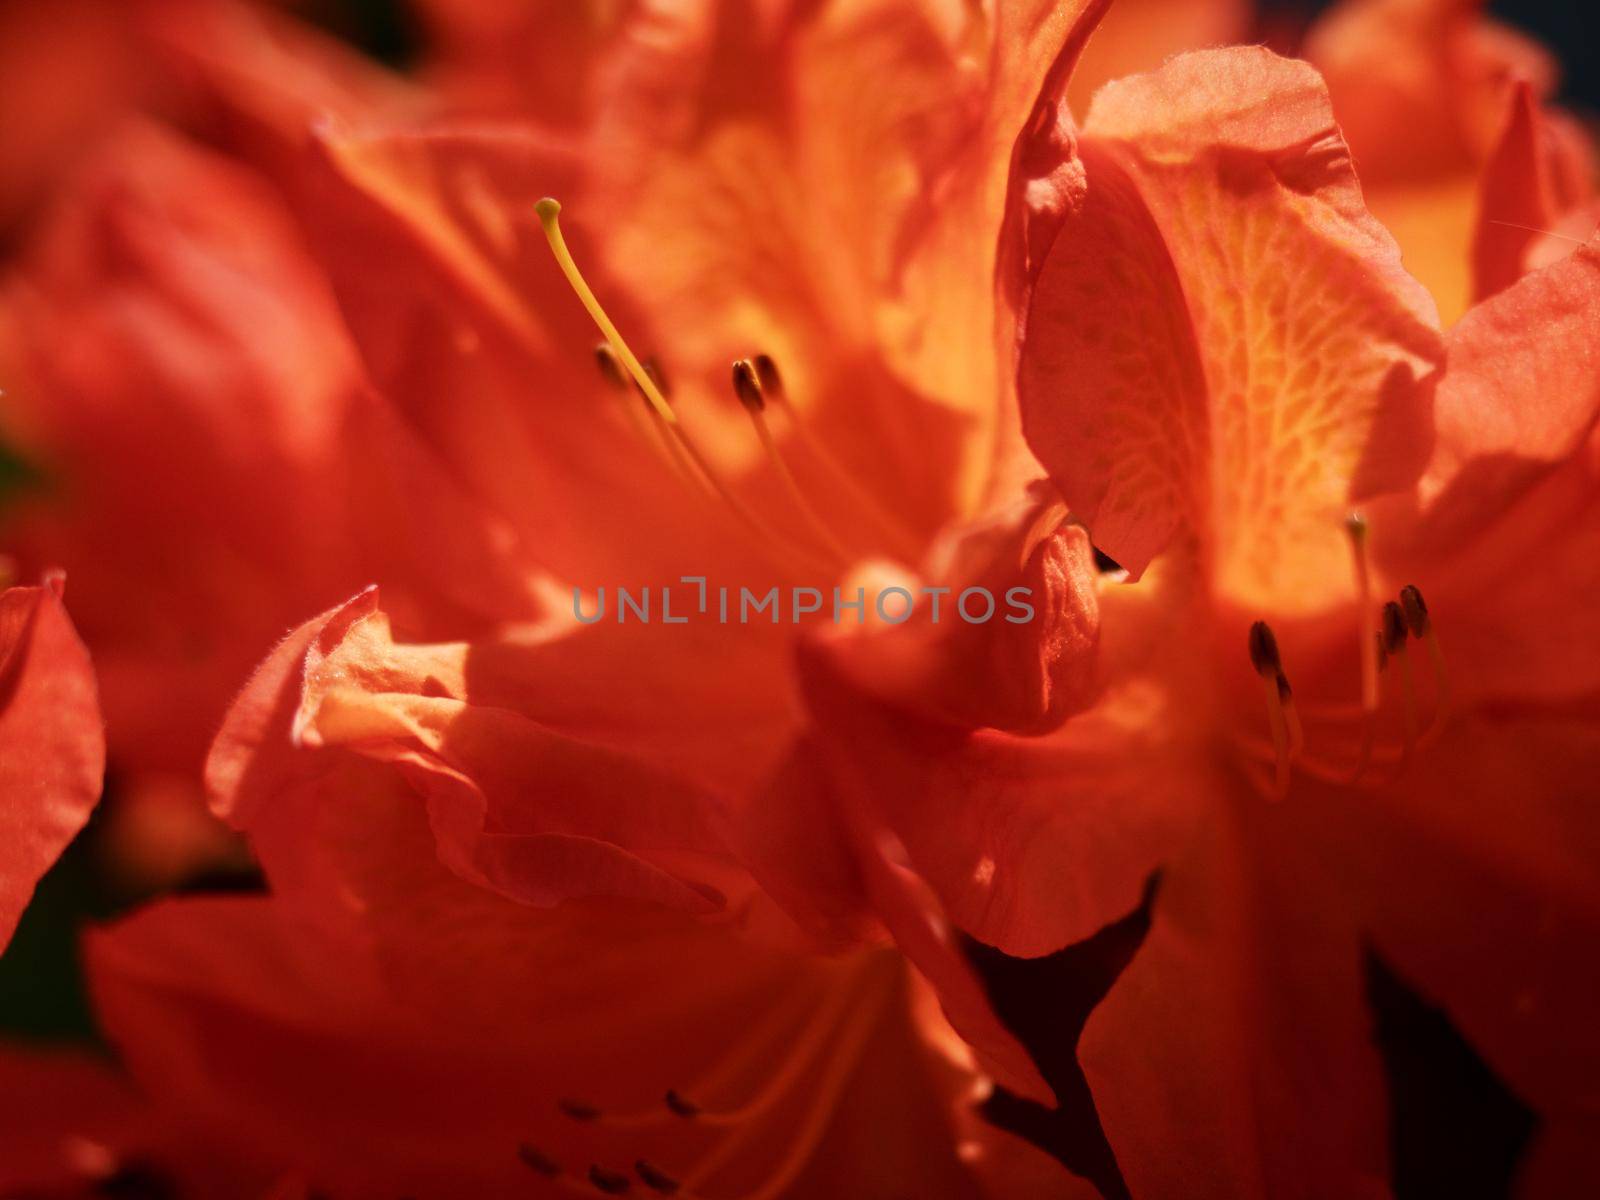 Orange red rhododendron blossom, shallow dof, focus on front blossom by rdonar2